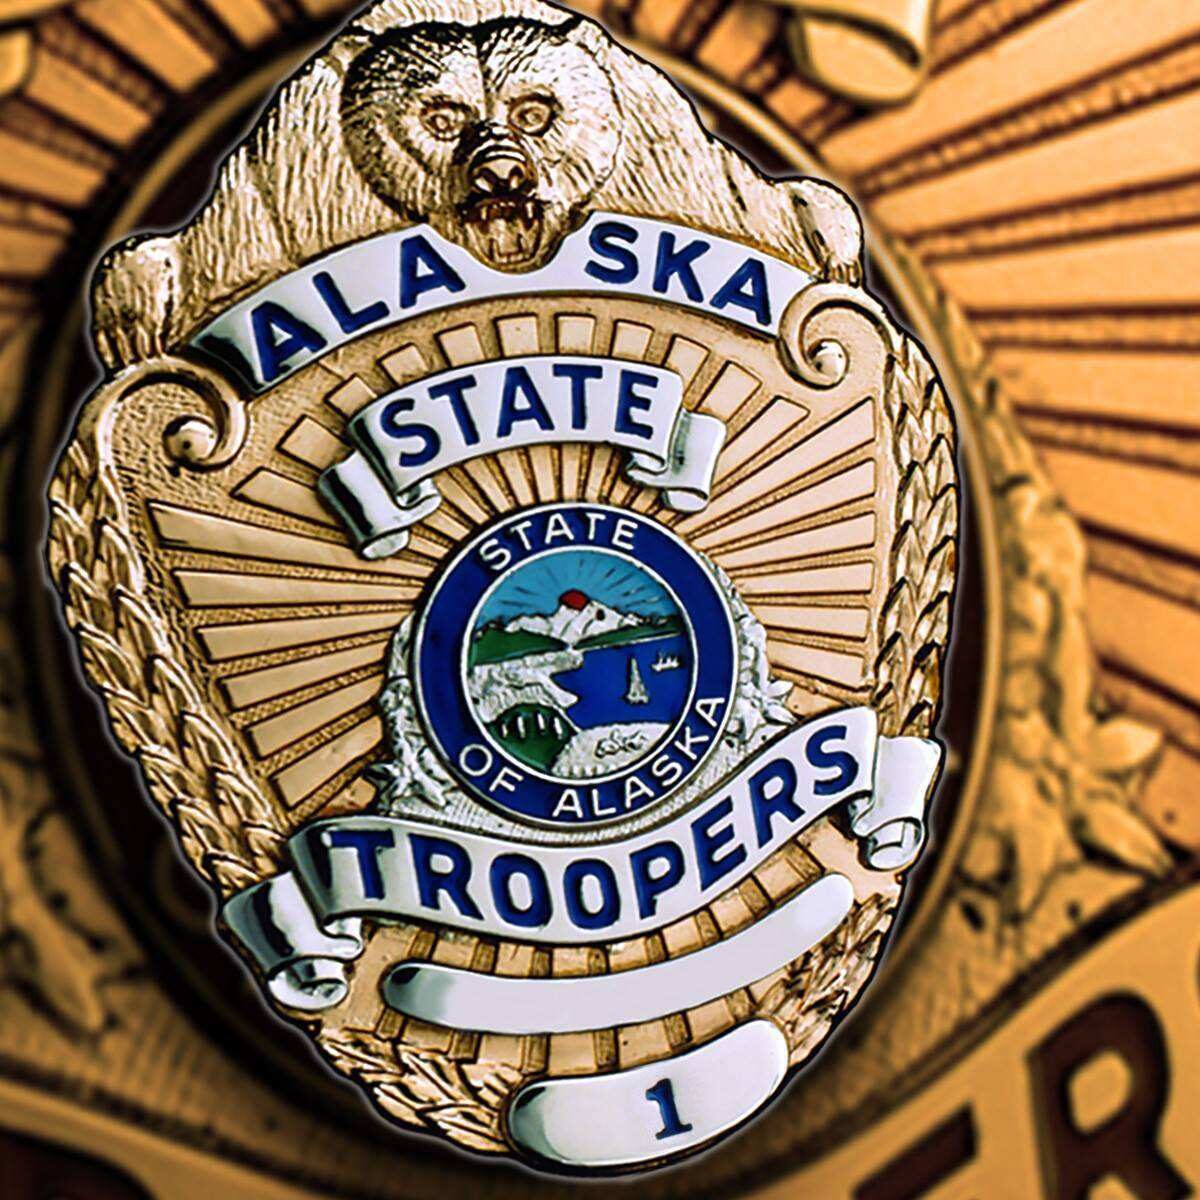 The badge of the Alaska State Troopers.